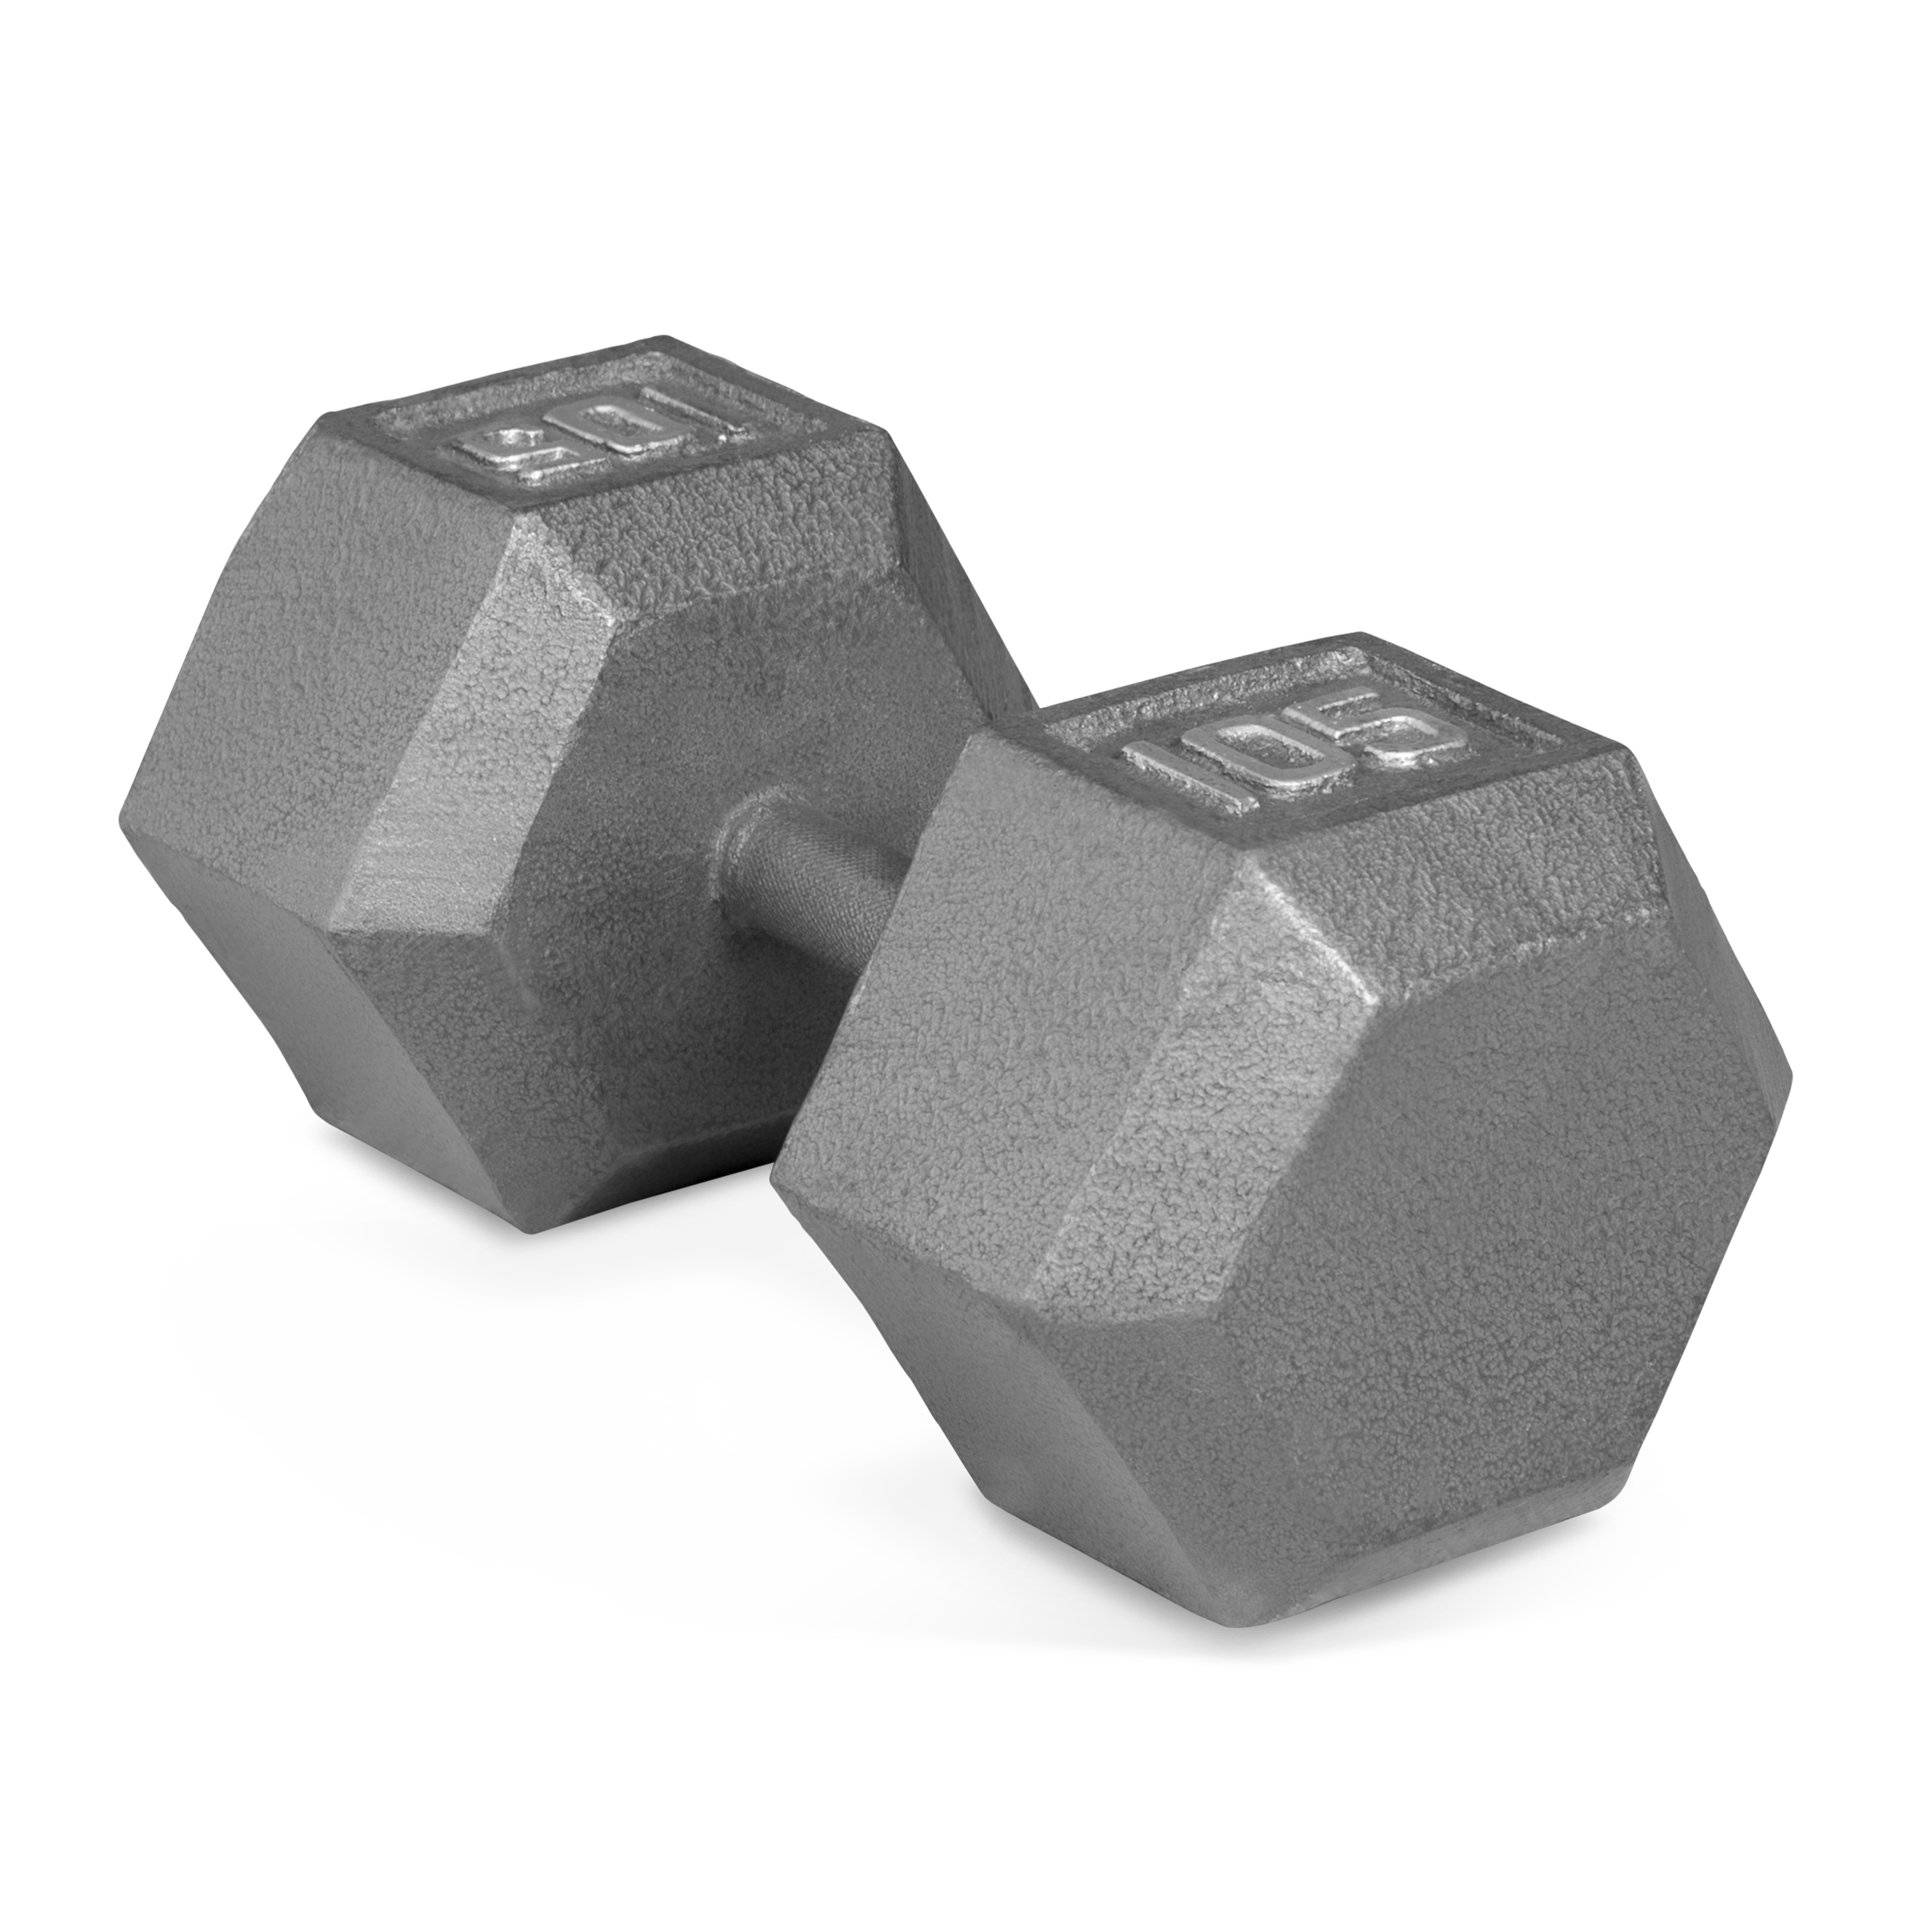 CAP Barbell 105lb Cast Iron Hex Dumbbell, Single - image 1 of 5